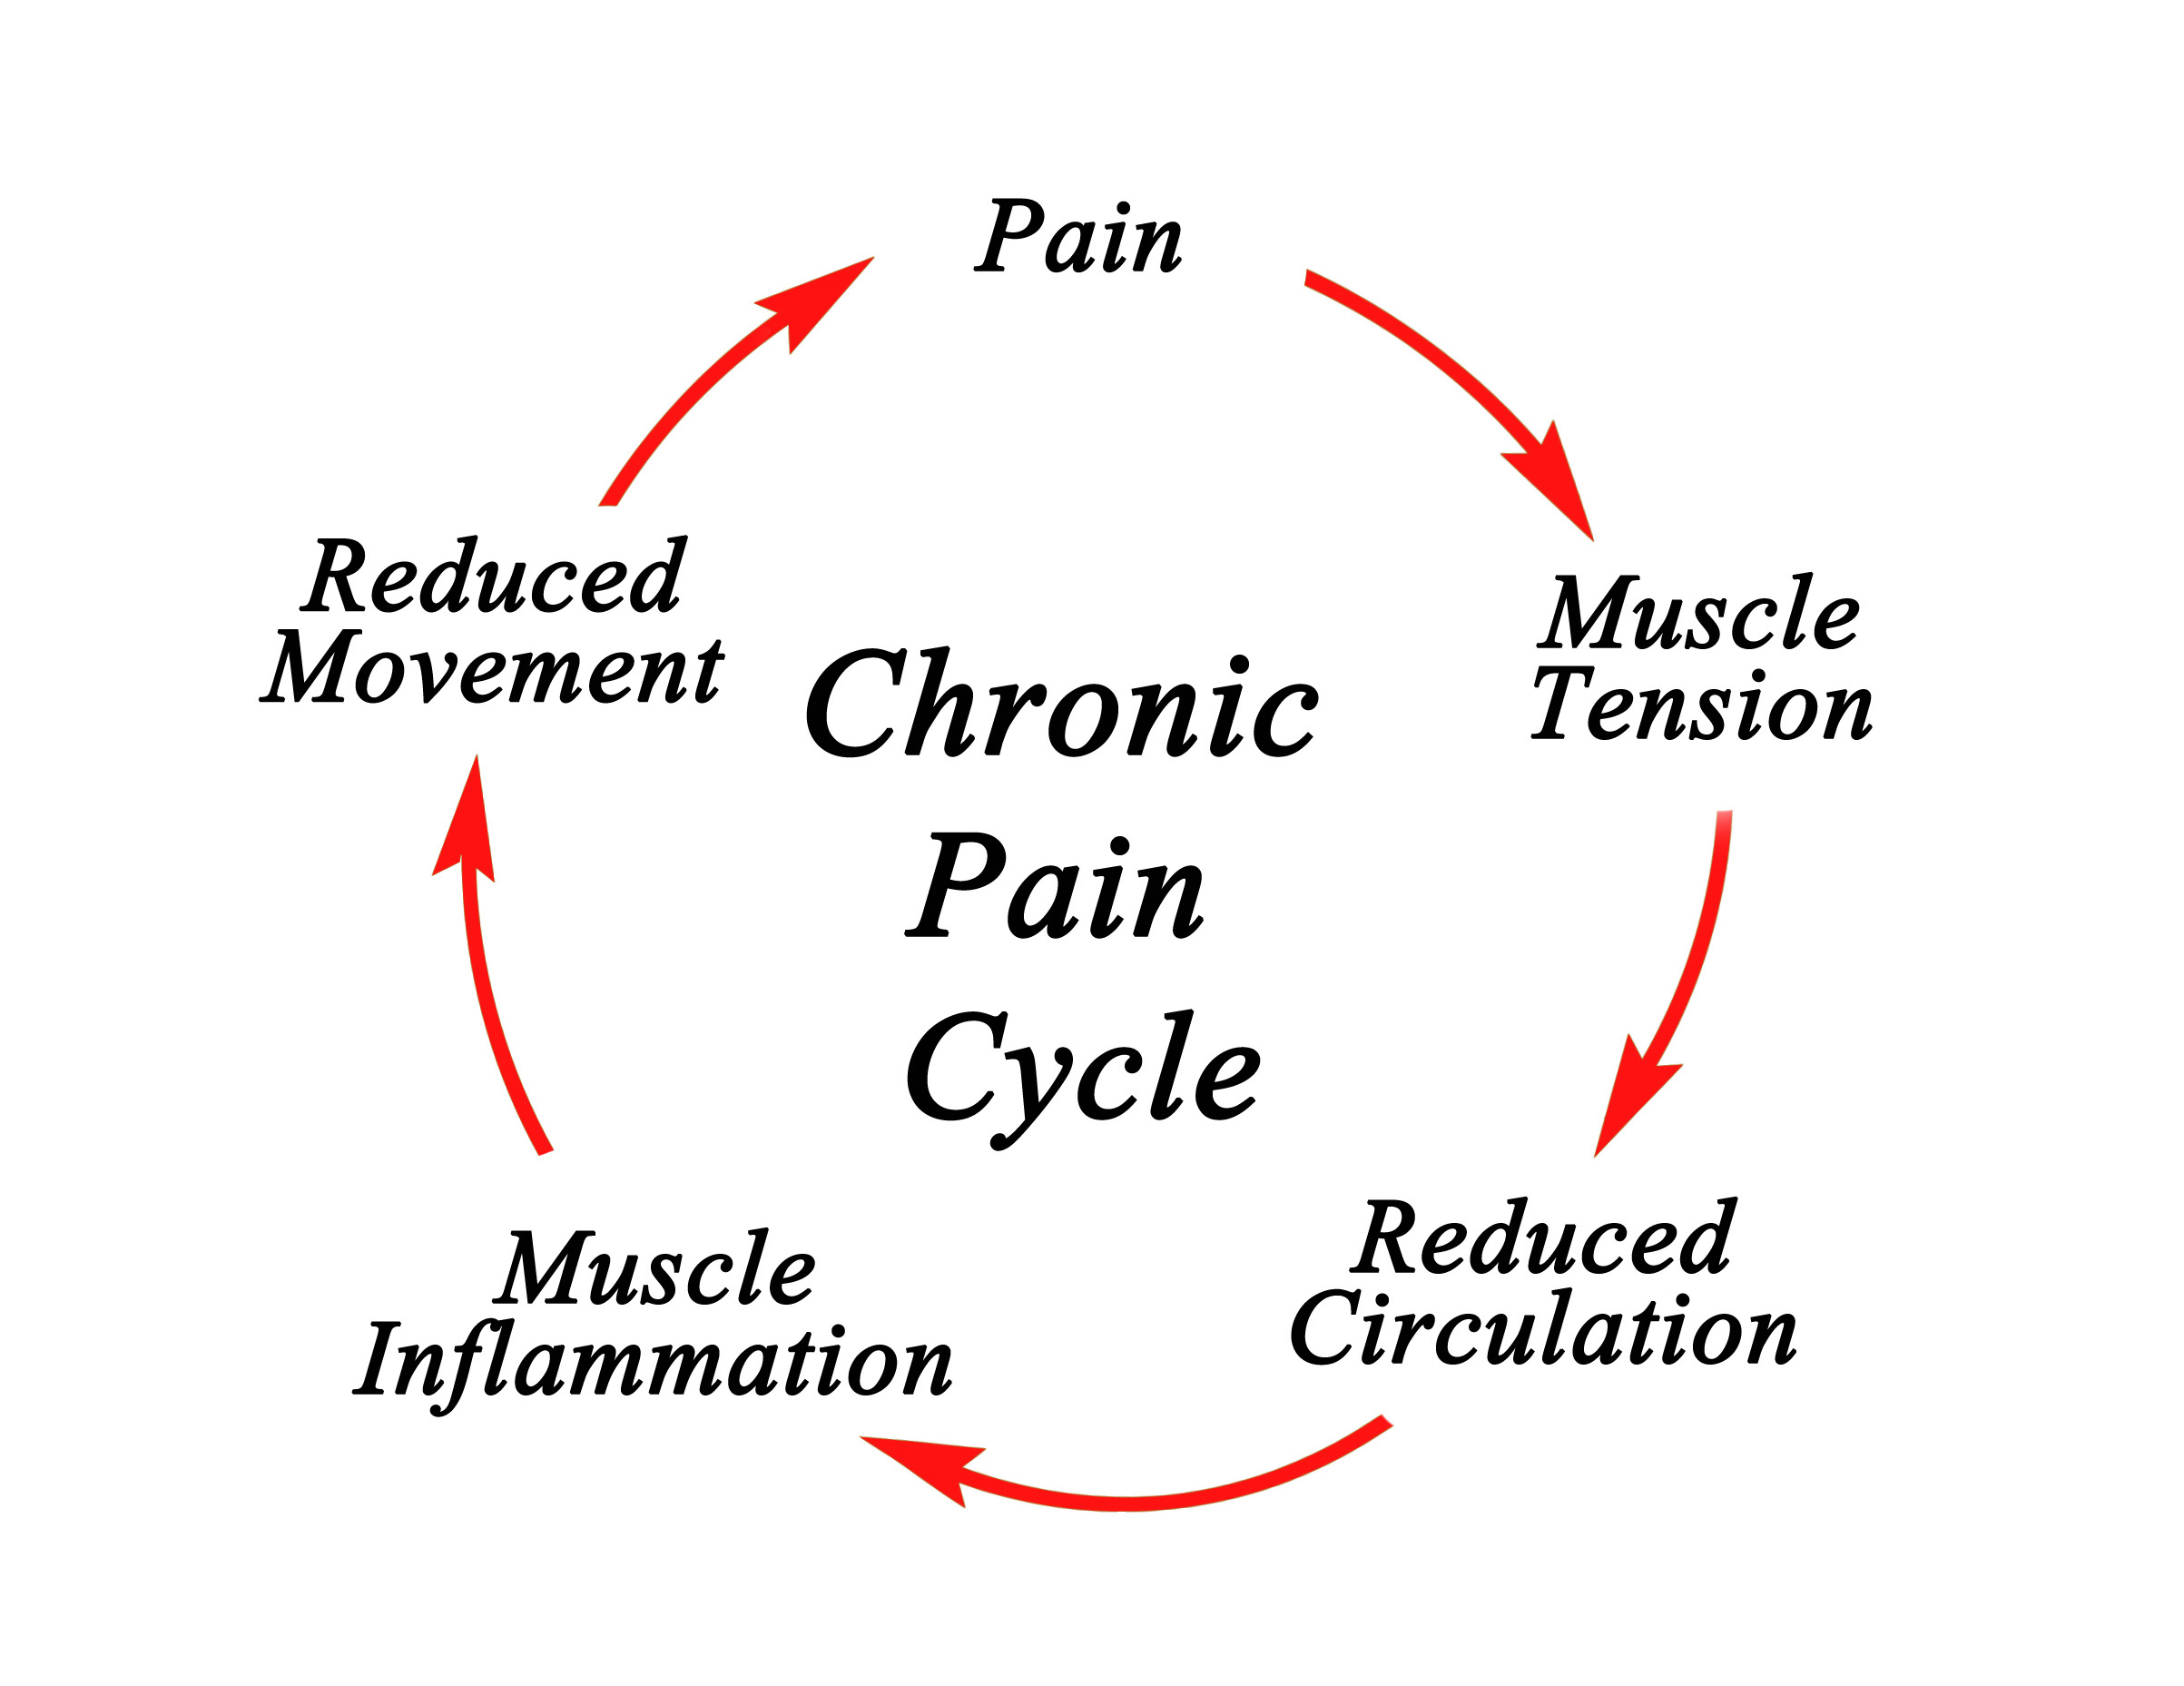 Defeat the Pain Cycle